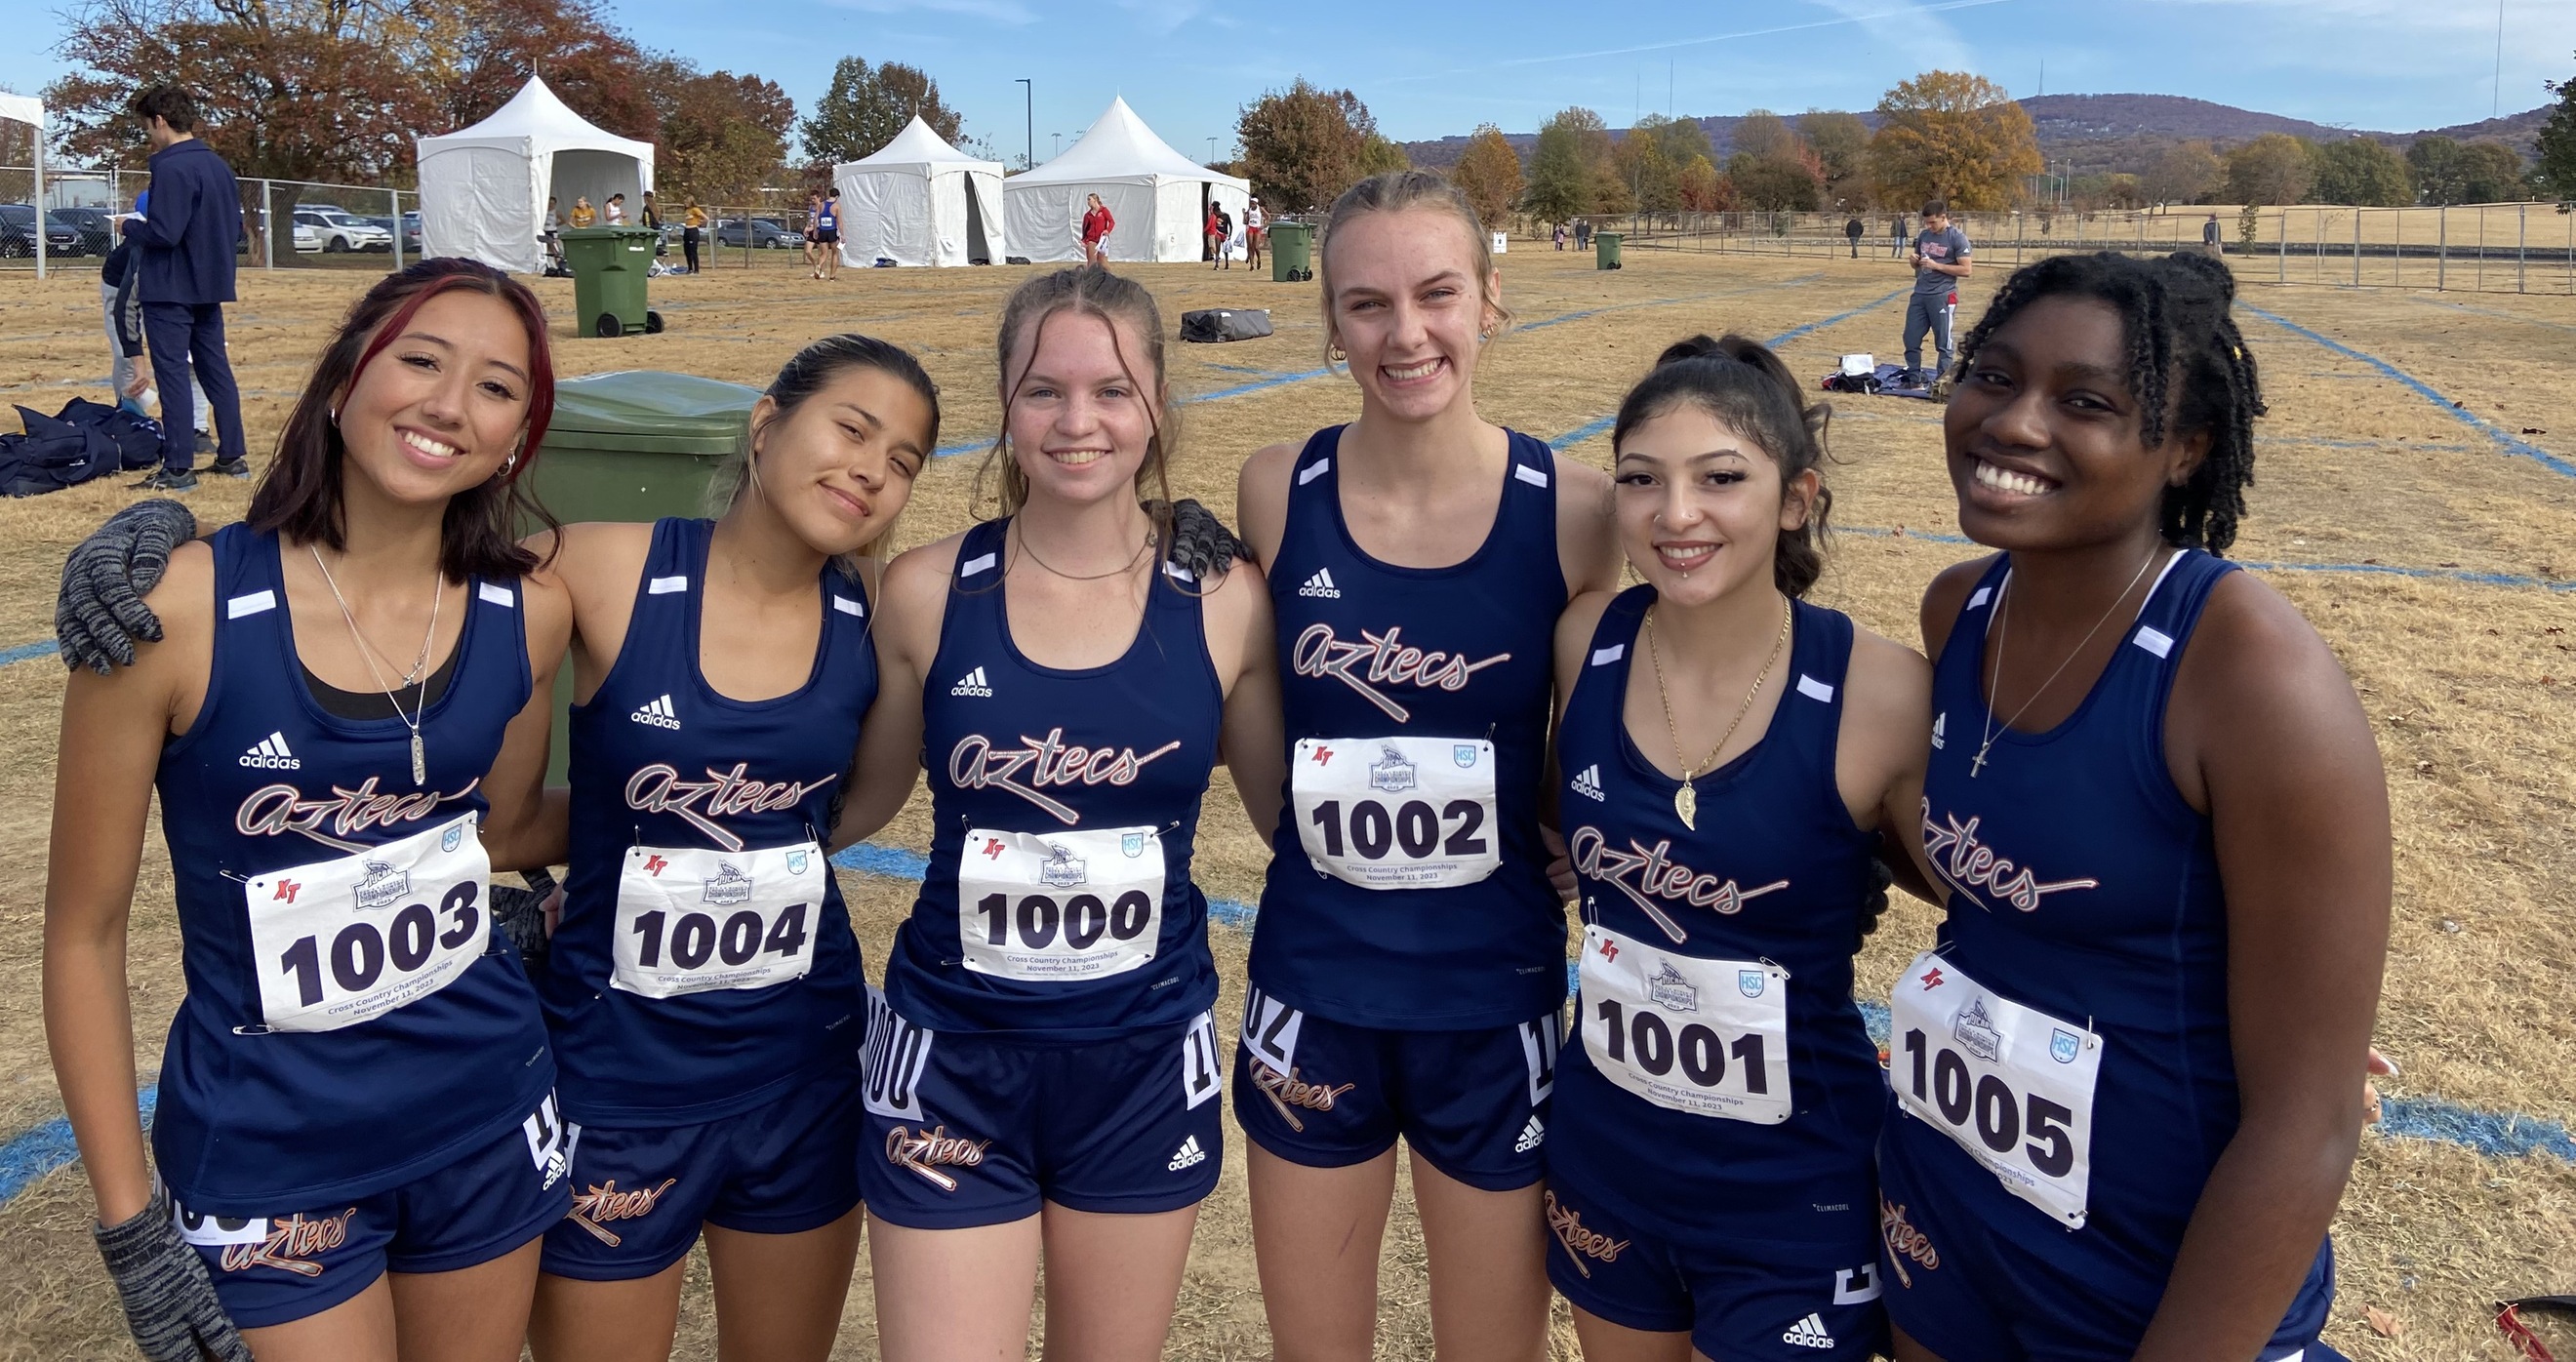 The Aztecs women's Cross Country team finished in 16th place at the NJCAA Division I National Championships with 446 points. It was the program's best finish since 2018. Freshman Reatta Danhof (Ironwood Ridge HS) was the top finisher in 65th place with a season personal-best time in the 5K at 19:56.20. (Left to Right): Alyssa Perez, Linda Rivero, Sara Bredenkamp, Reatta Danhof, Mariah Cruz and Iyannah Tolliver. Photo courtesy of Mark Bennett